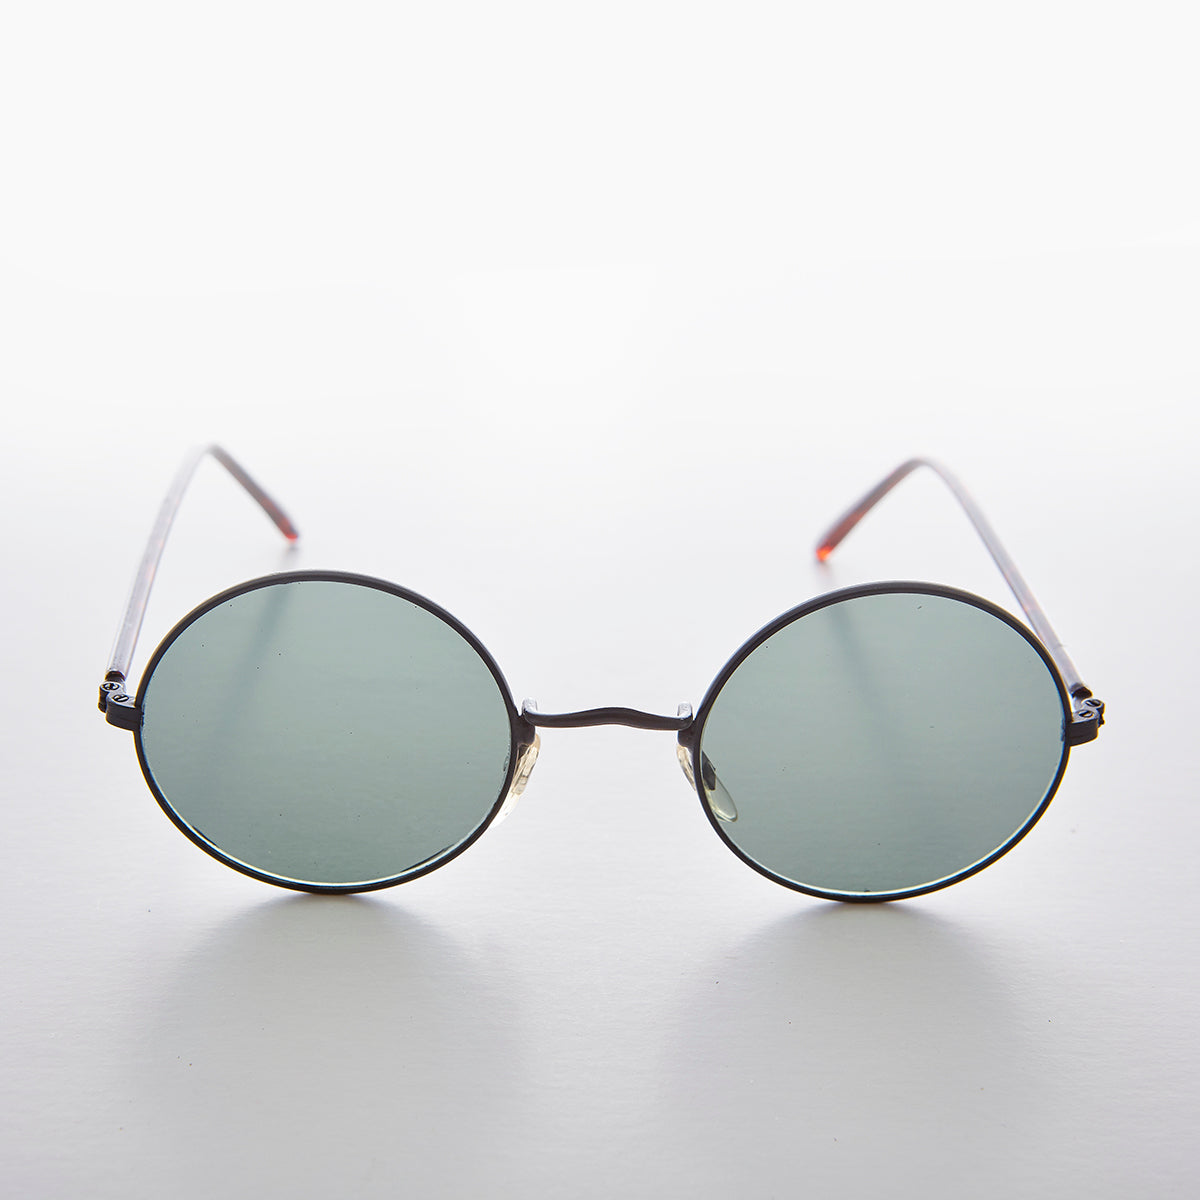 Round Hippy Vintage Sunglass with Glass Lens 